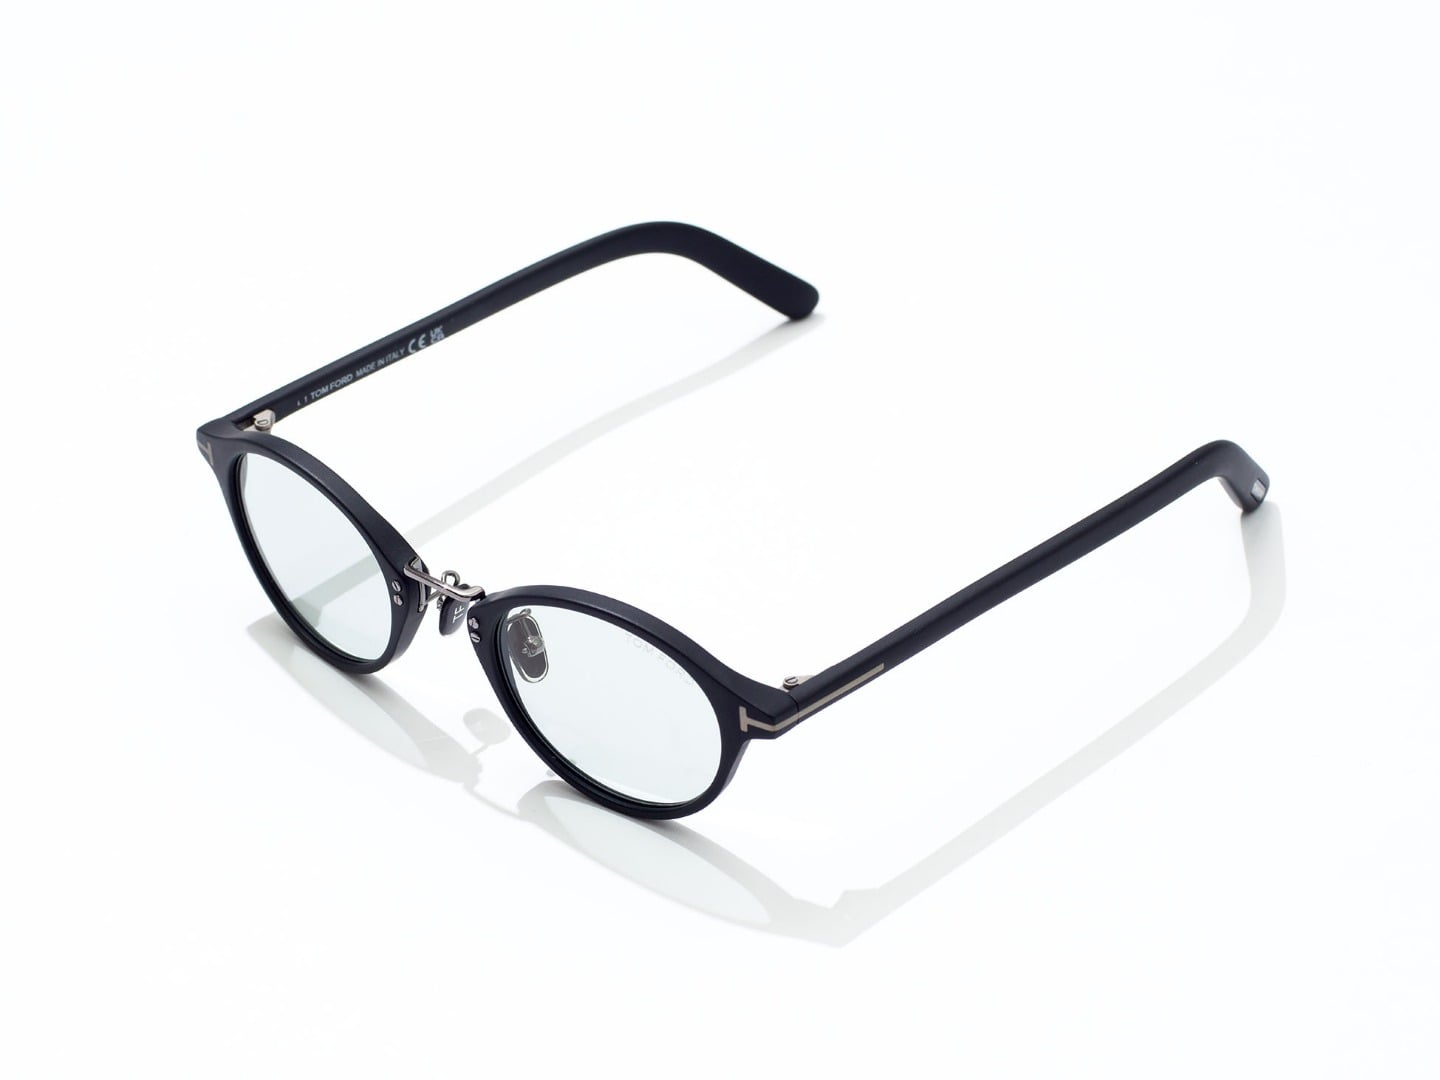 TOM FORD EYEWEAR Exclusive for Ron Herman 8.5(Sat) New Arrival 